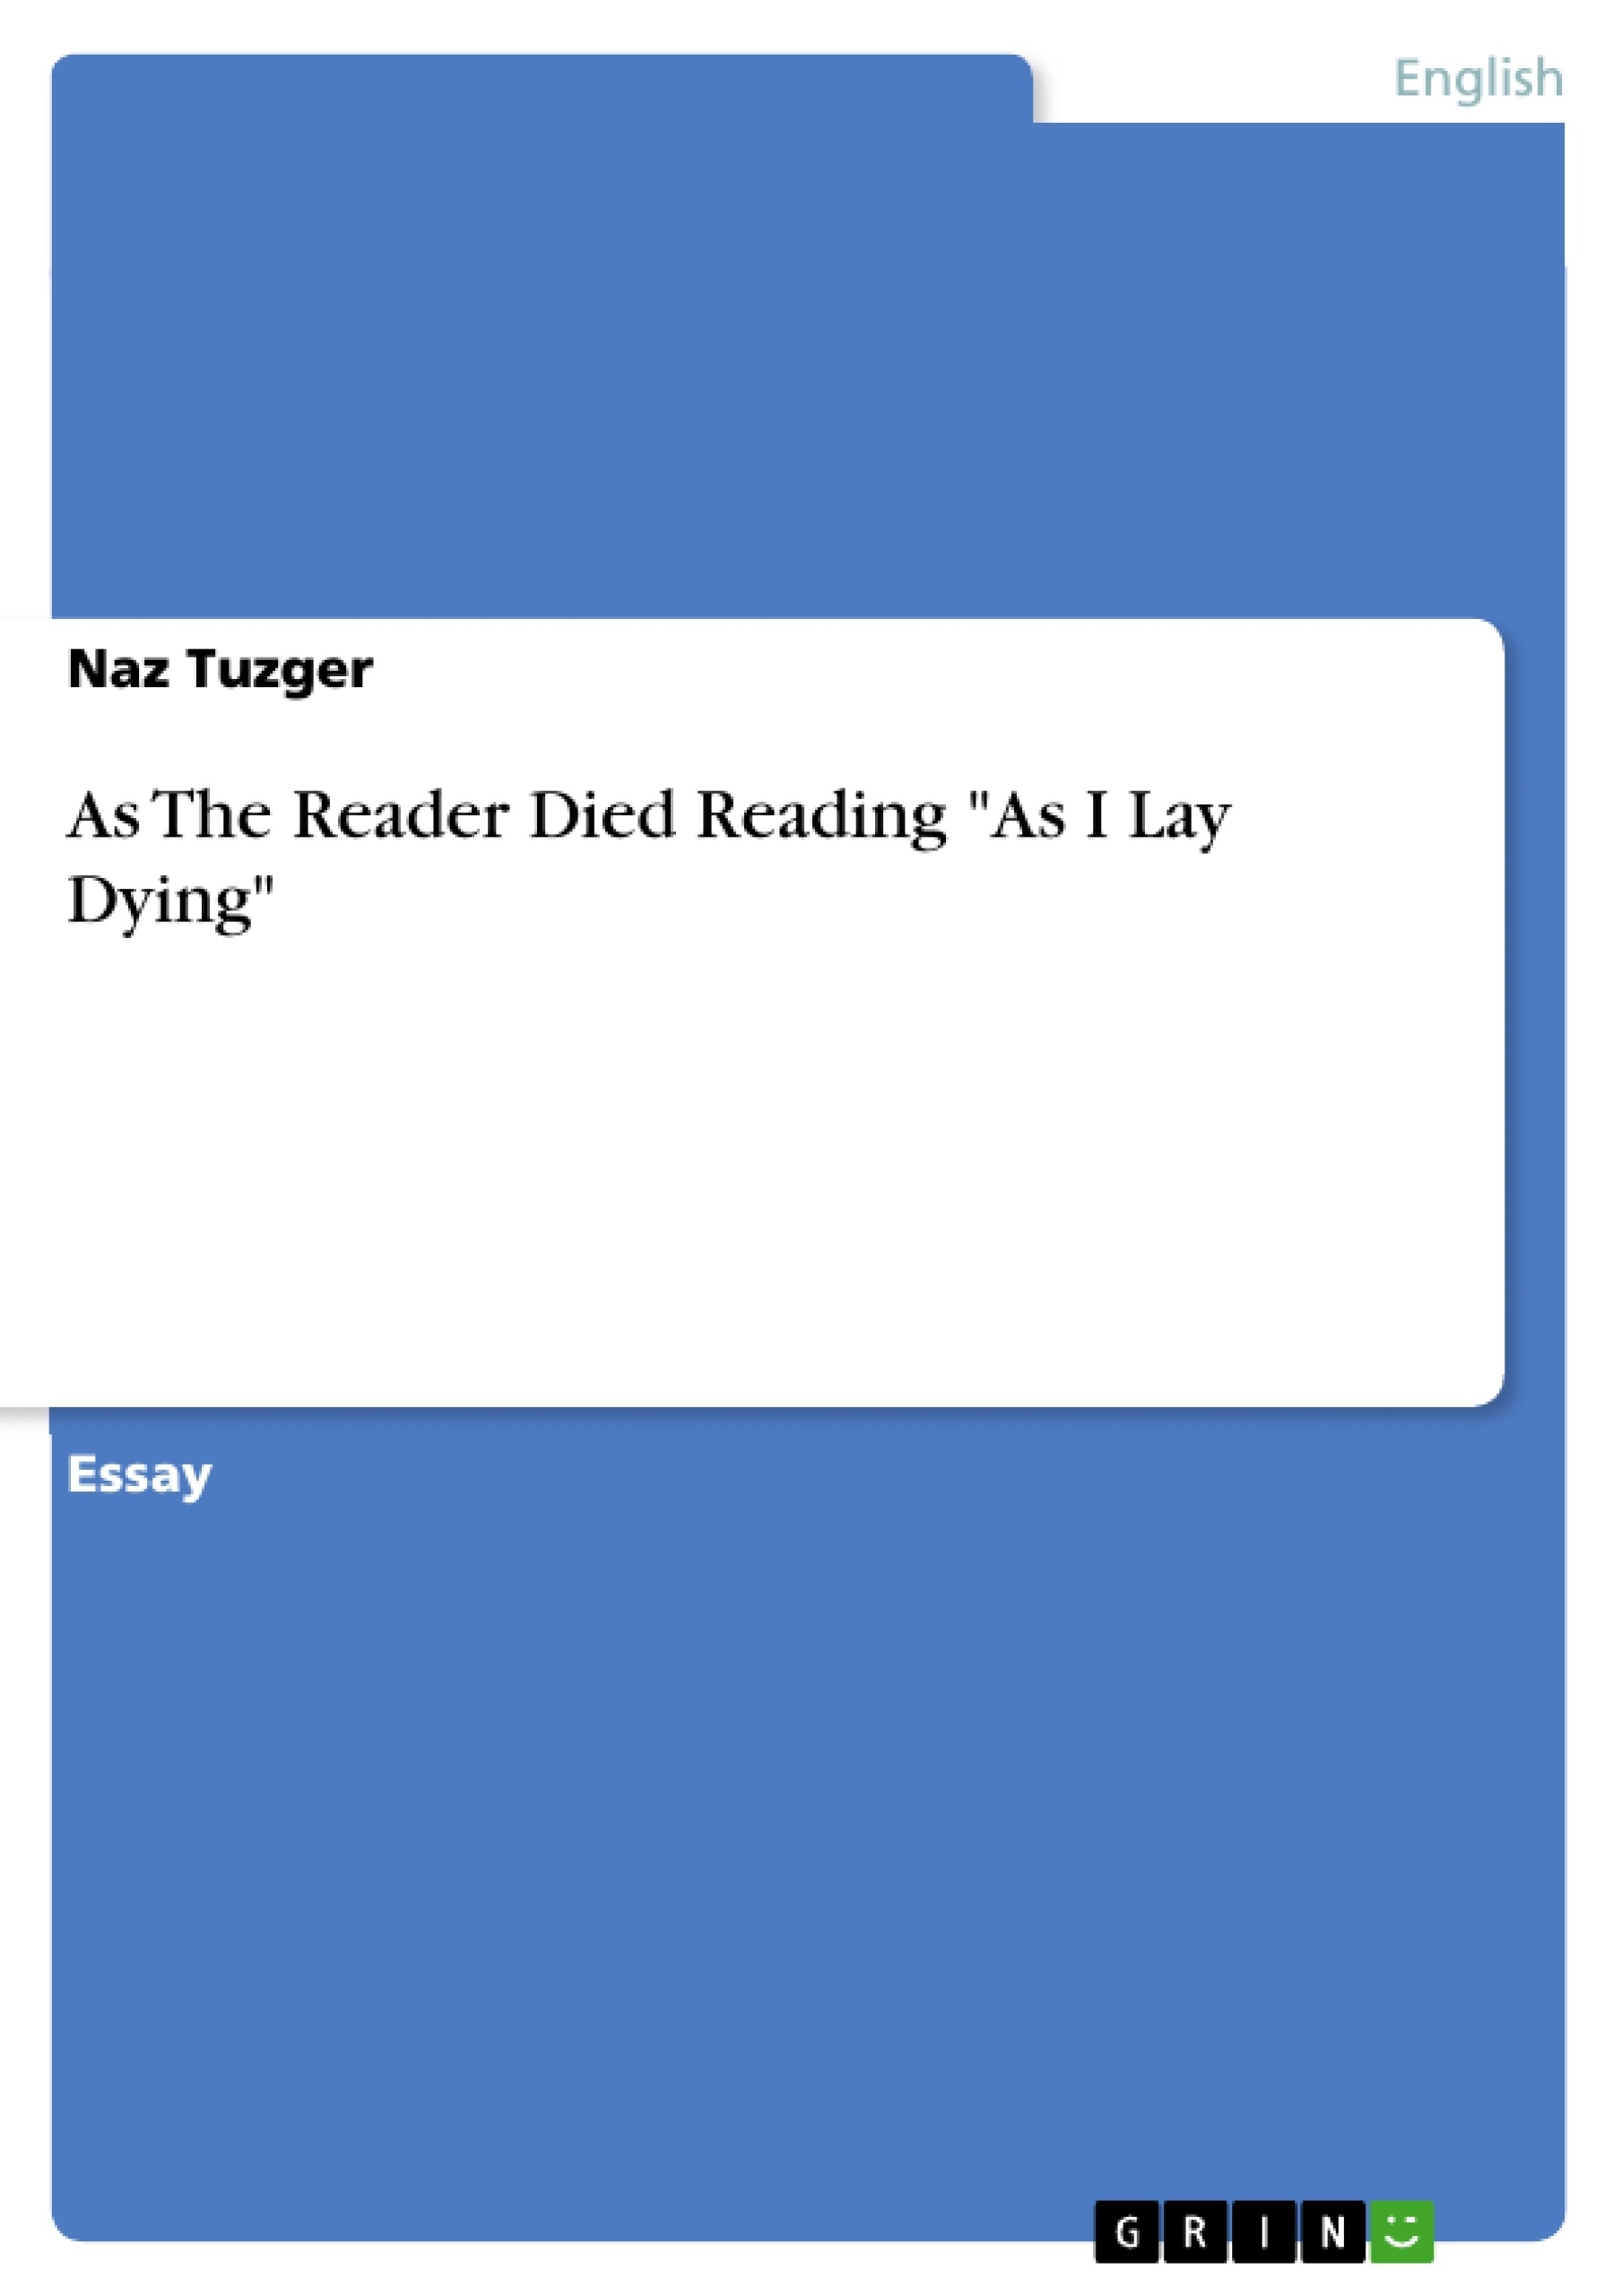 Titel: As The Reader Died Reading "As I Lay Dying"